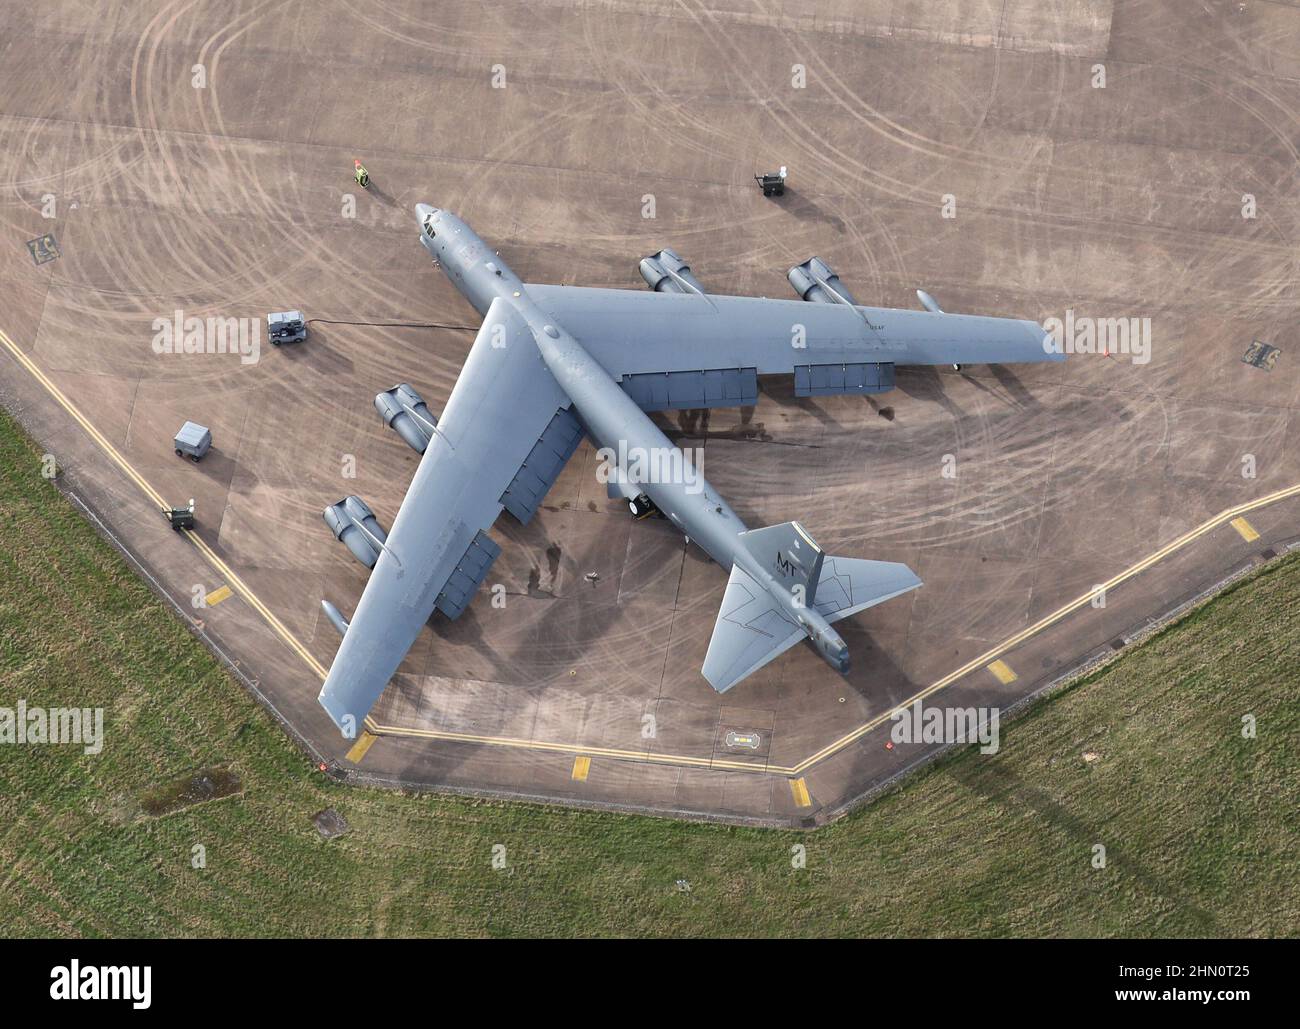 Aerial photograph of USAF Boeing B-52 soon after the arrival of 4 bombers at RAF Fairford near Cirencester in the U.K. as tension in Ukraine mounts. Stock Photo